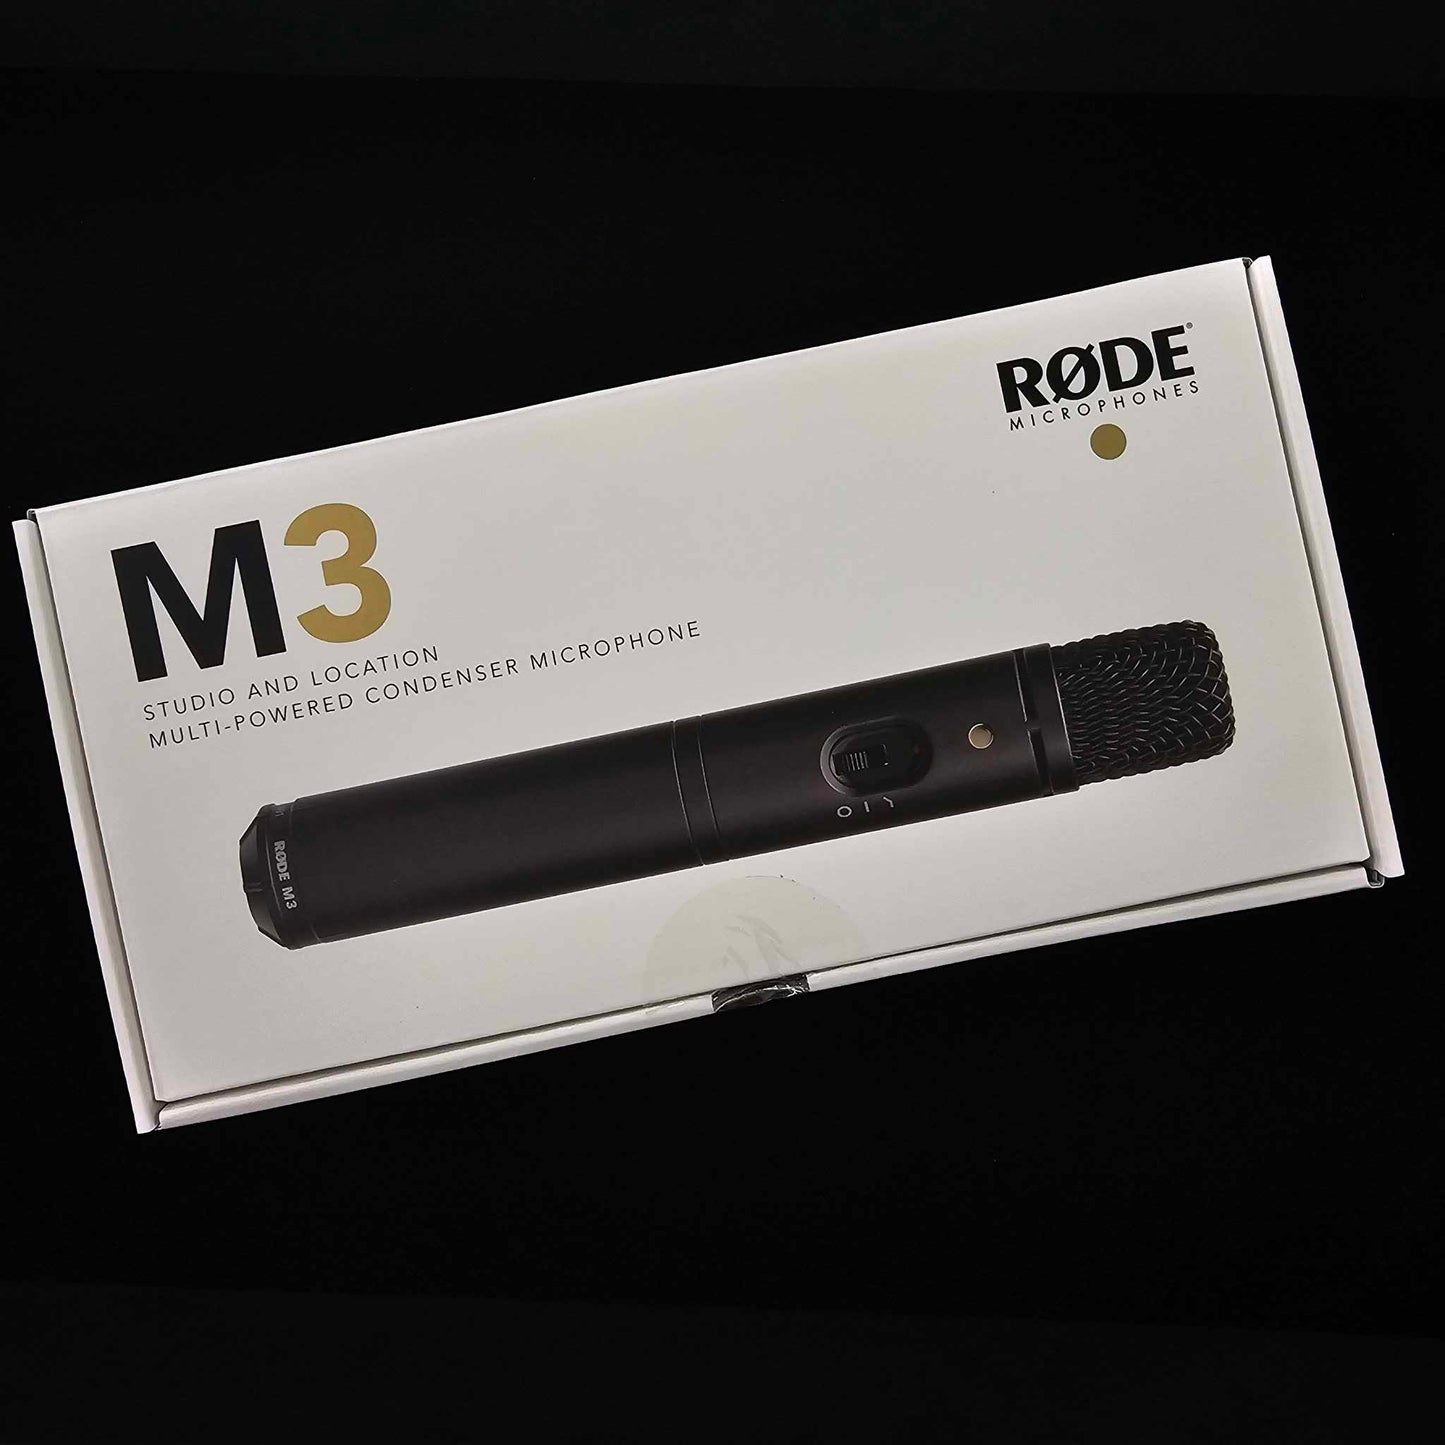 Rode M3 Studio and Location Multi-Powered Pencil Condenser Microphone